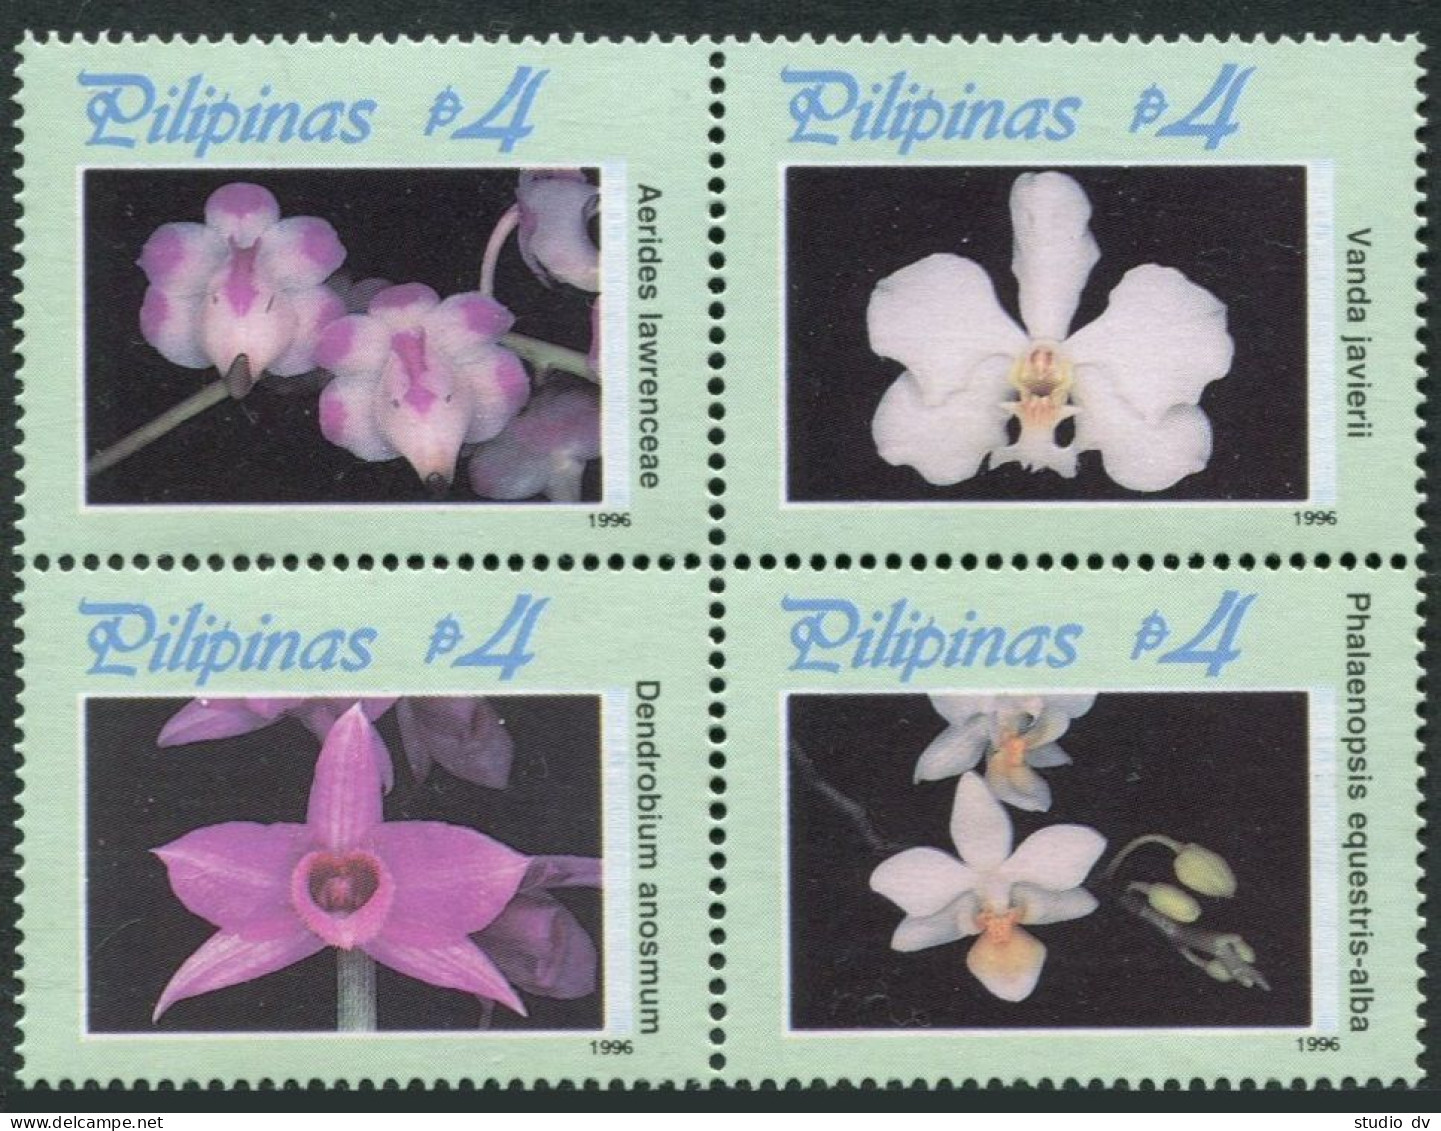 Philippines 2428-2429 Ad Block,2430 Sheet,MNH. Orchids.ASEANPEX-1996. - Philippines